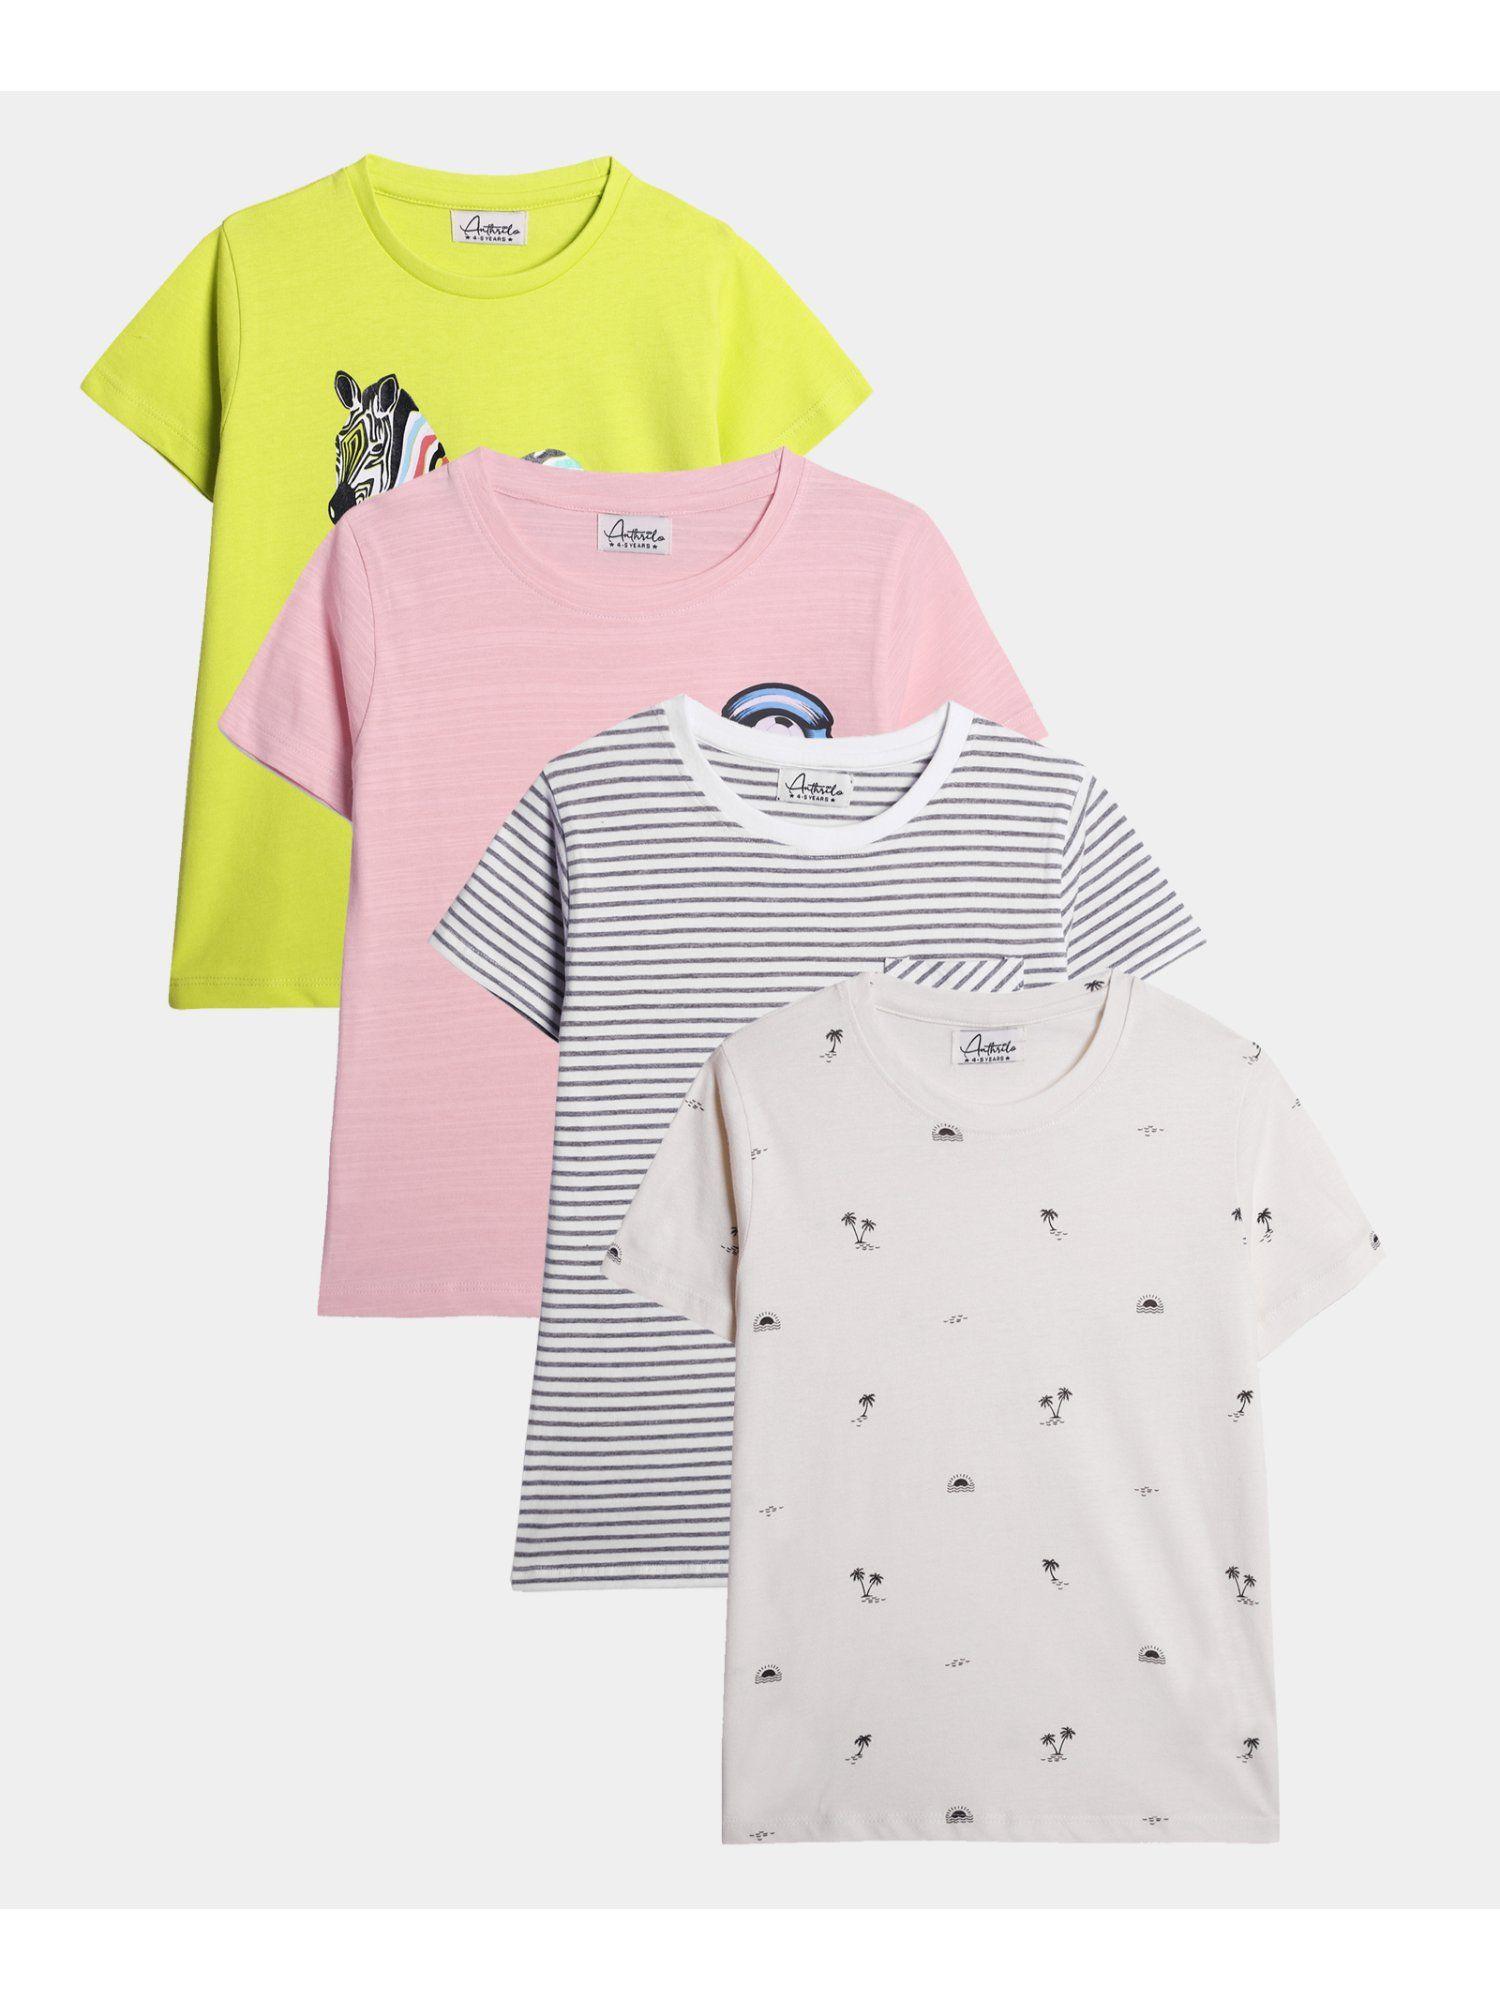 palm, grey stripe peach and zebra boys short sleeves t-shirts (pack of 4)